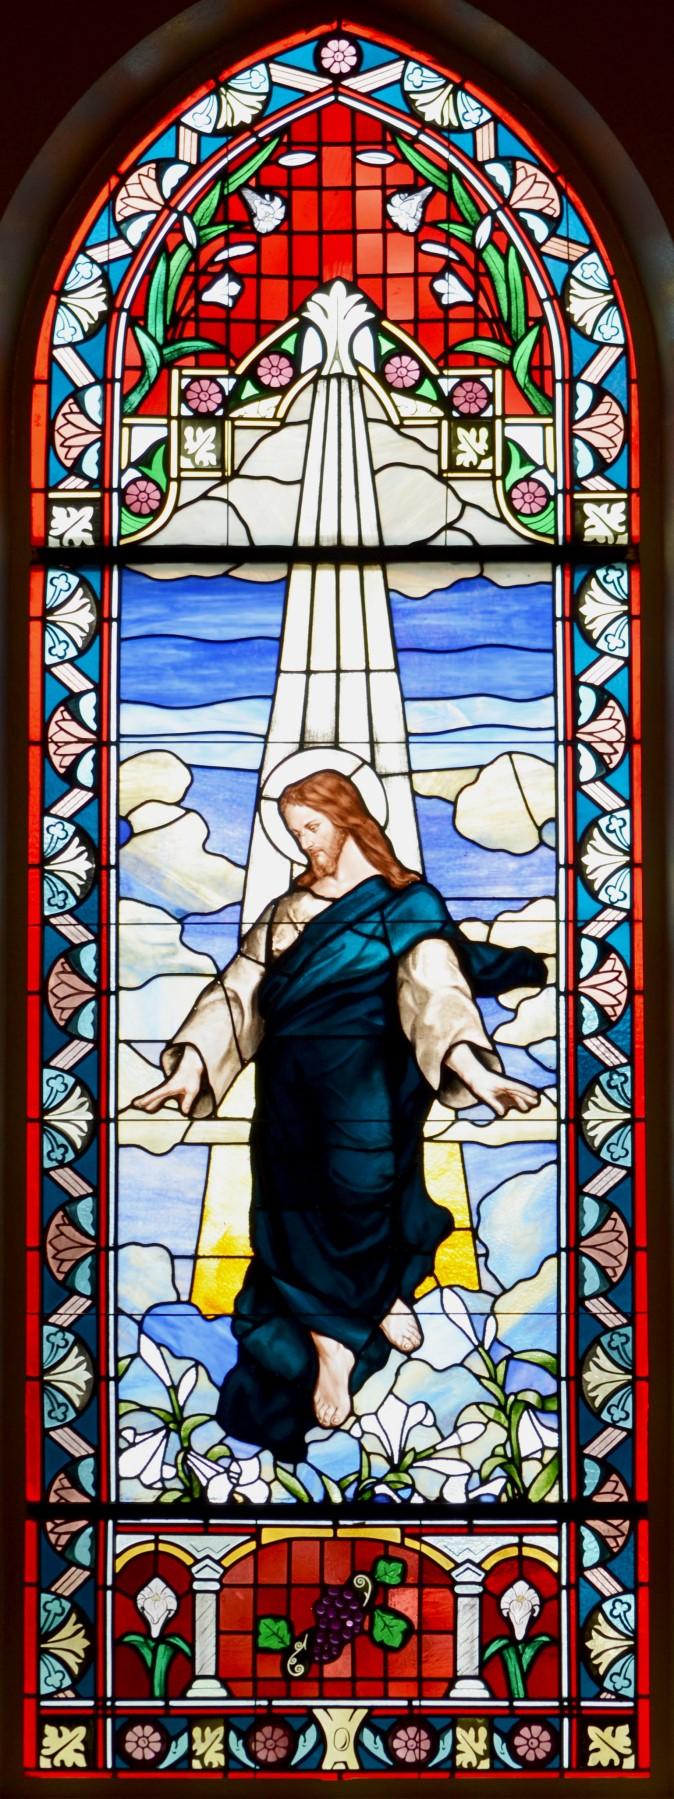 *From the previous church. The Ascension of Christ, Acts 1:9.